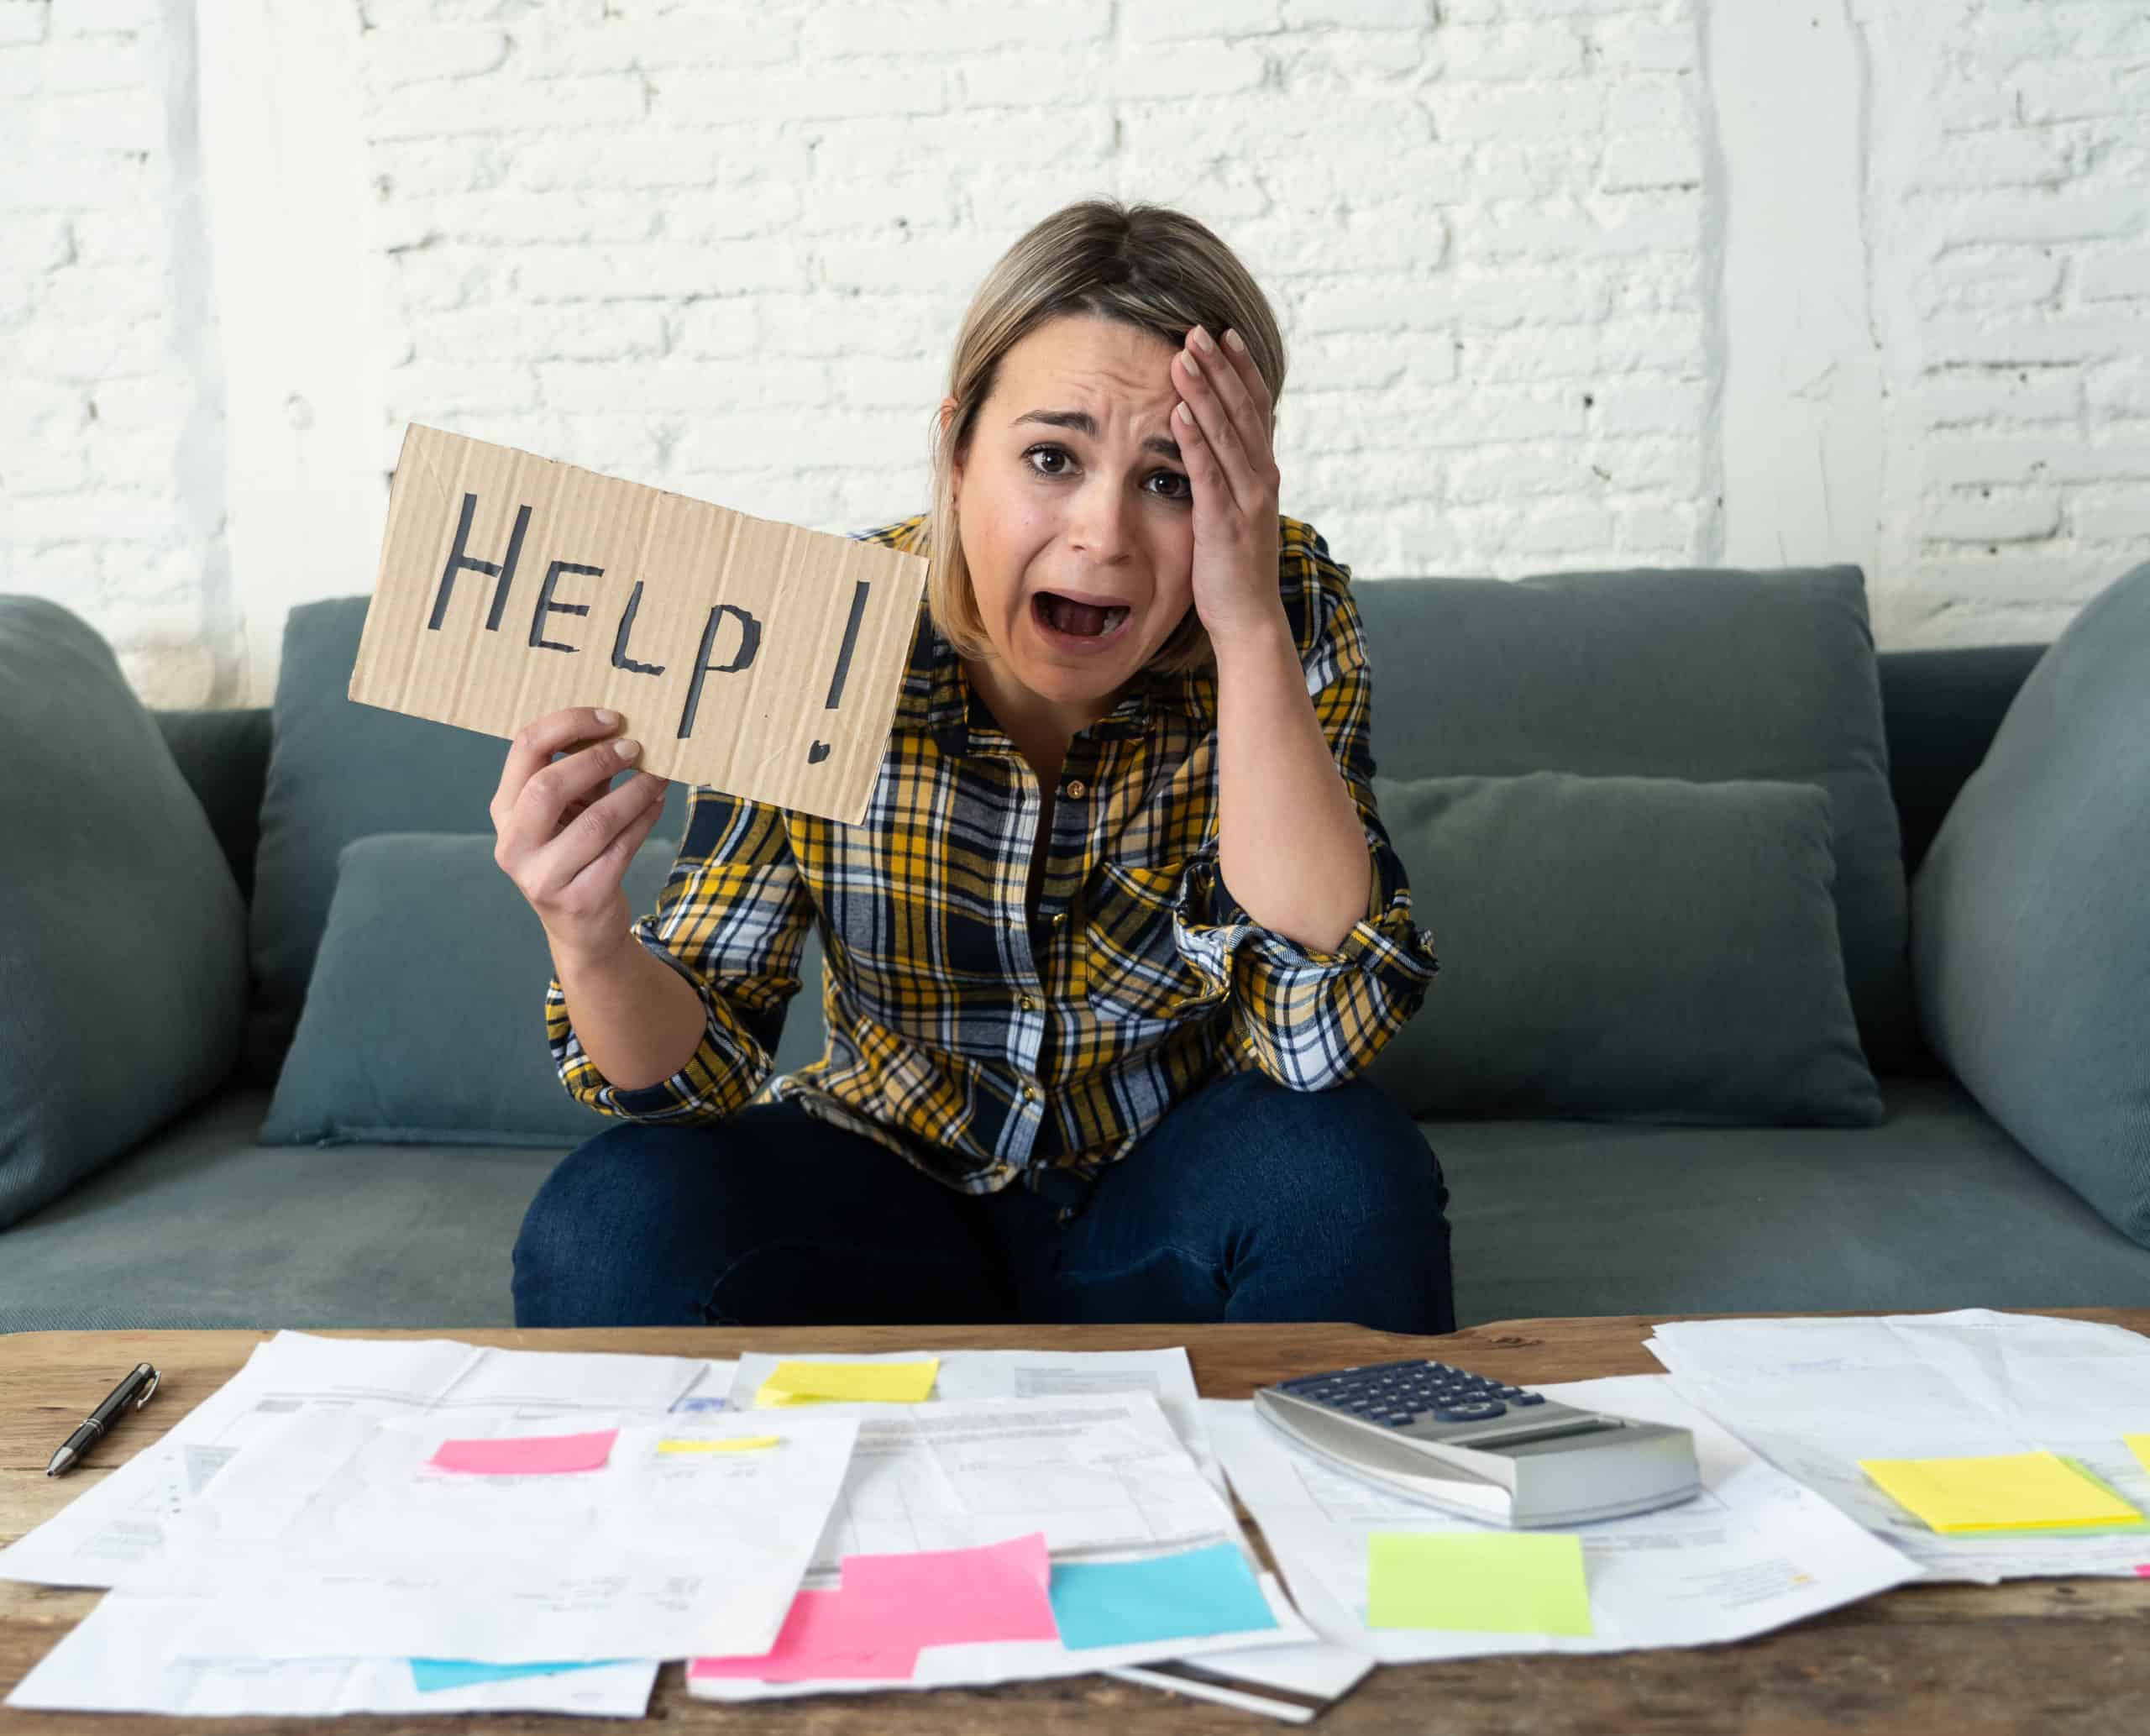 Feeling Overwhelmed? It’s Not What You Think